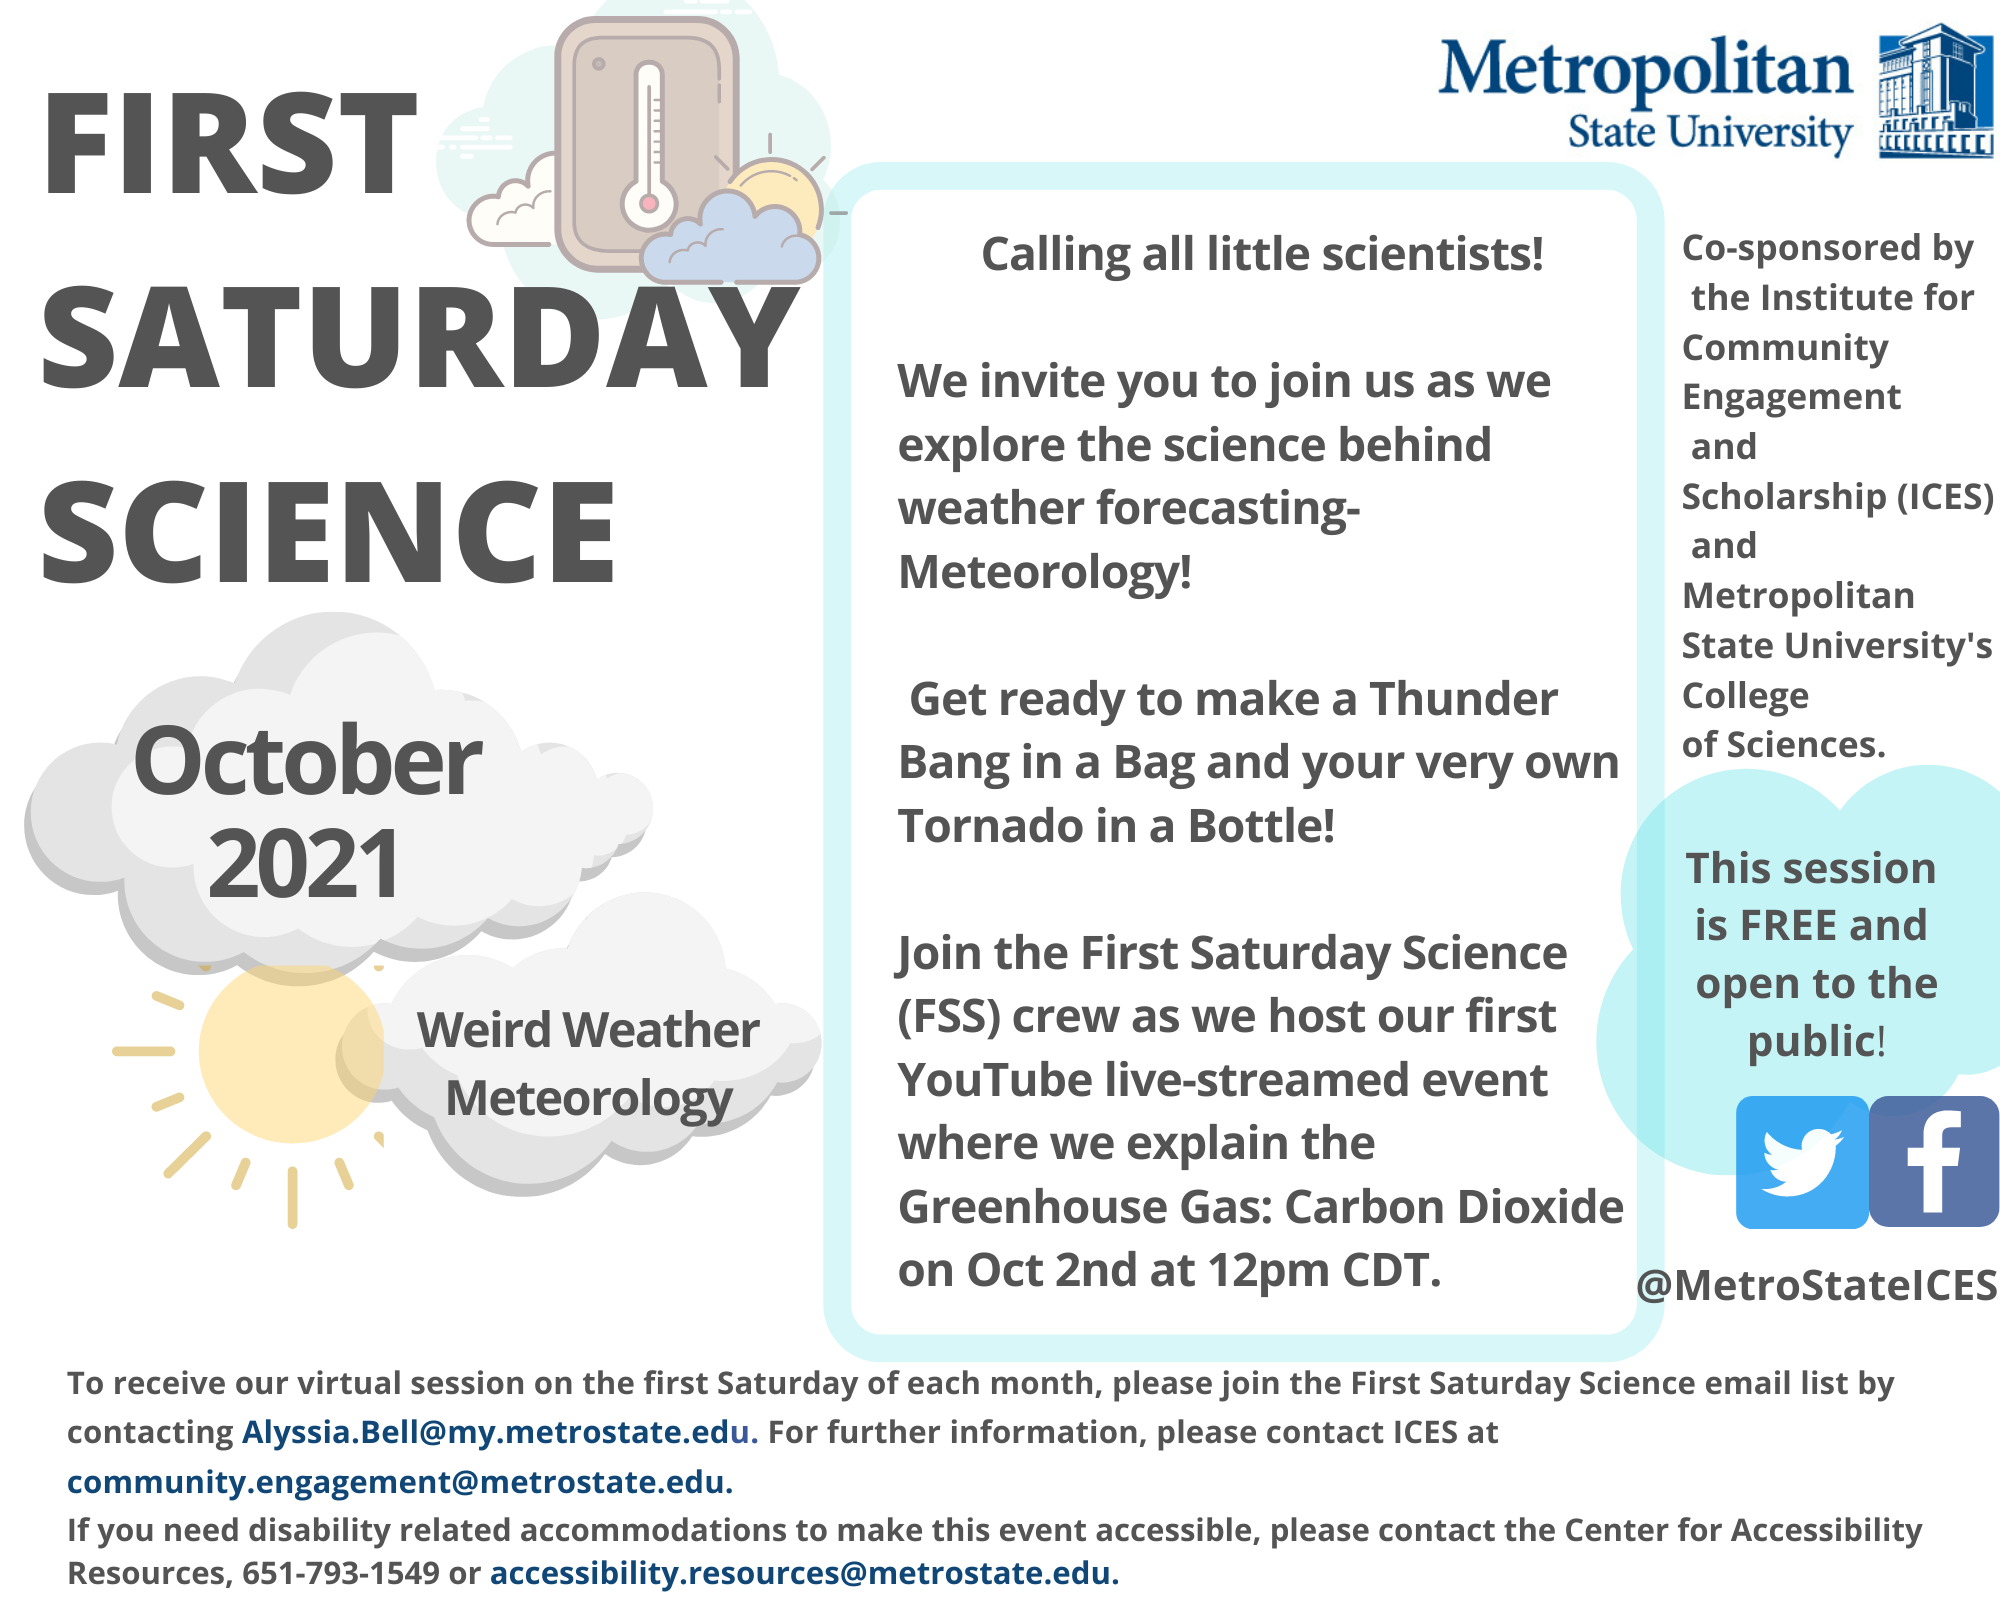 October 2021 flyer for First Saturday Science at Metro State University